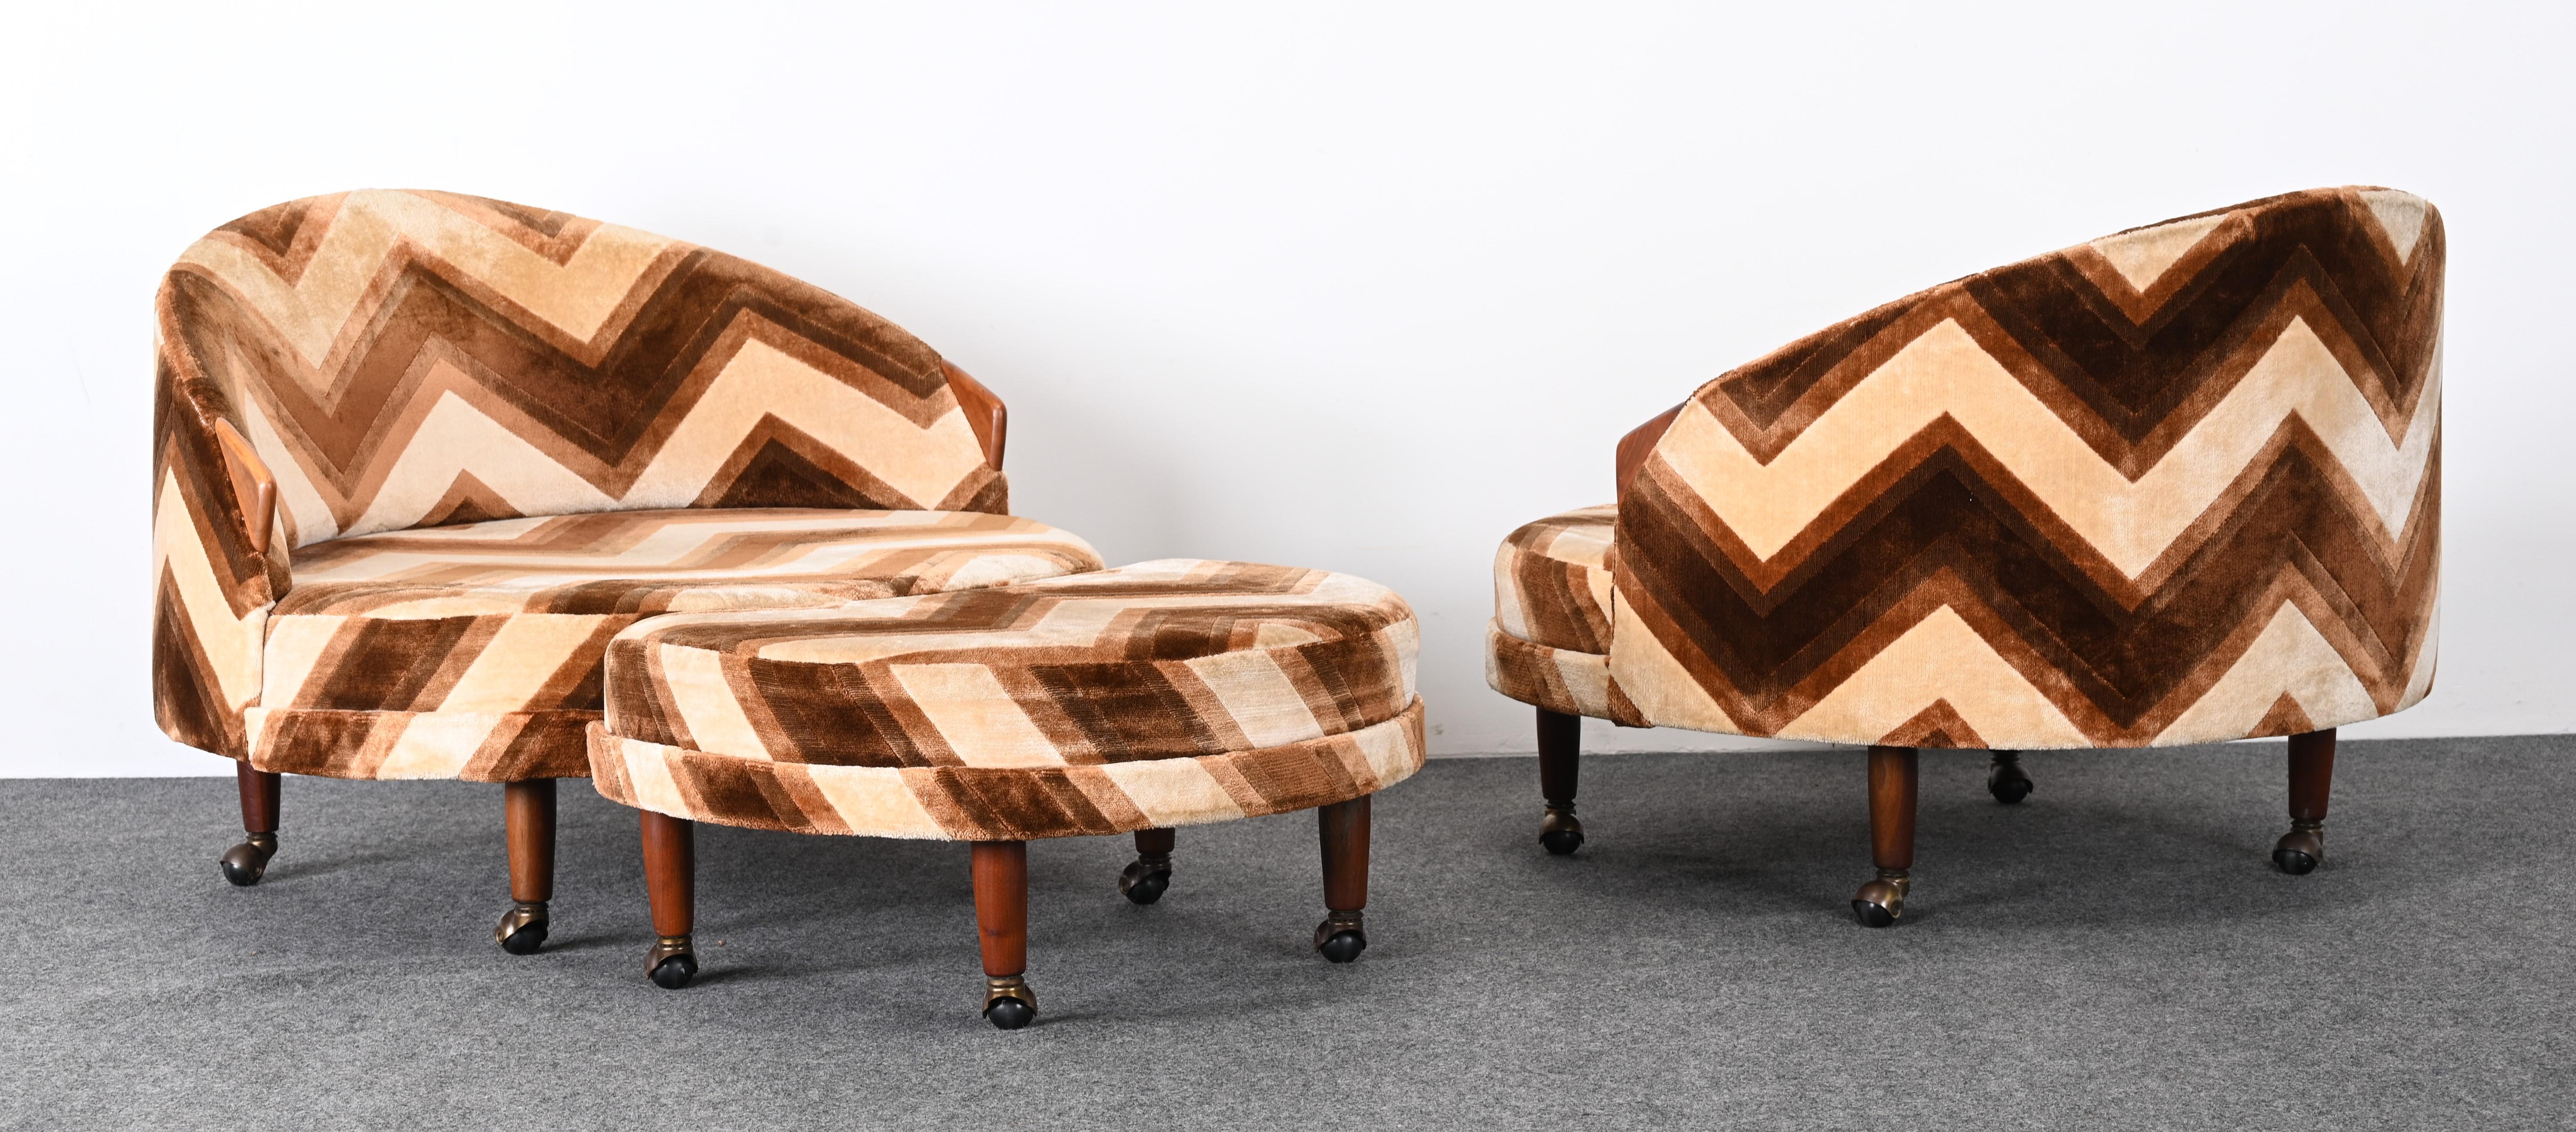 A vintage pair of Adrian Pearsall Havana chairs with ottoman for Craft Associates, 1965. The fabric is vintage with age-appropriate wear. New upholstery is recommended. The classic Havana chair by Adrian Pearsall has some wear on the walnut accents